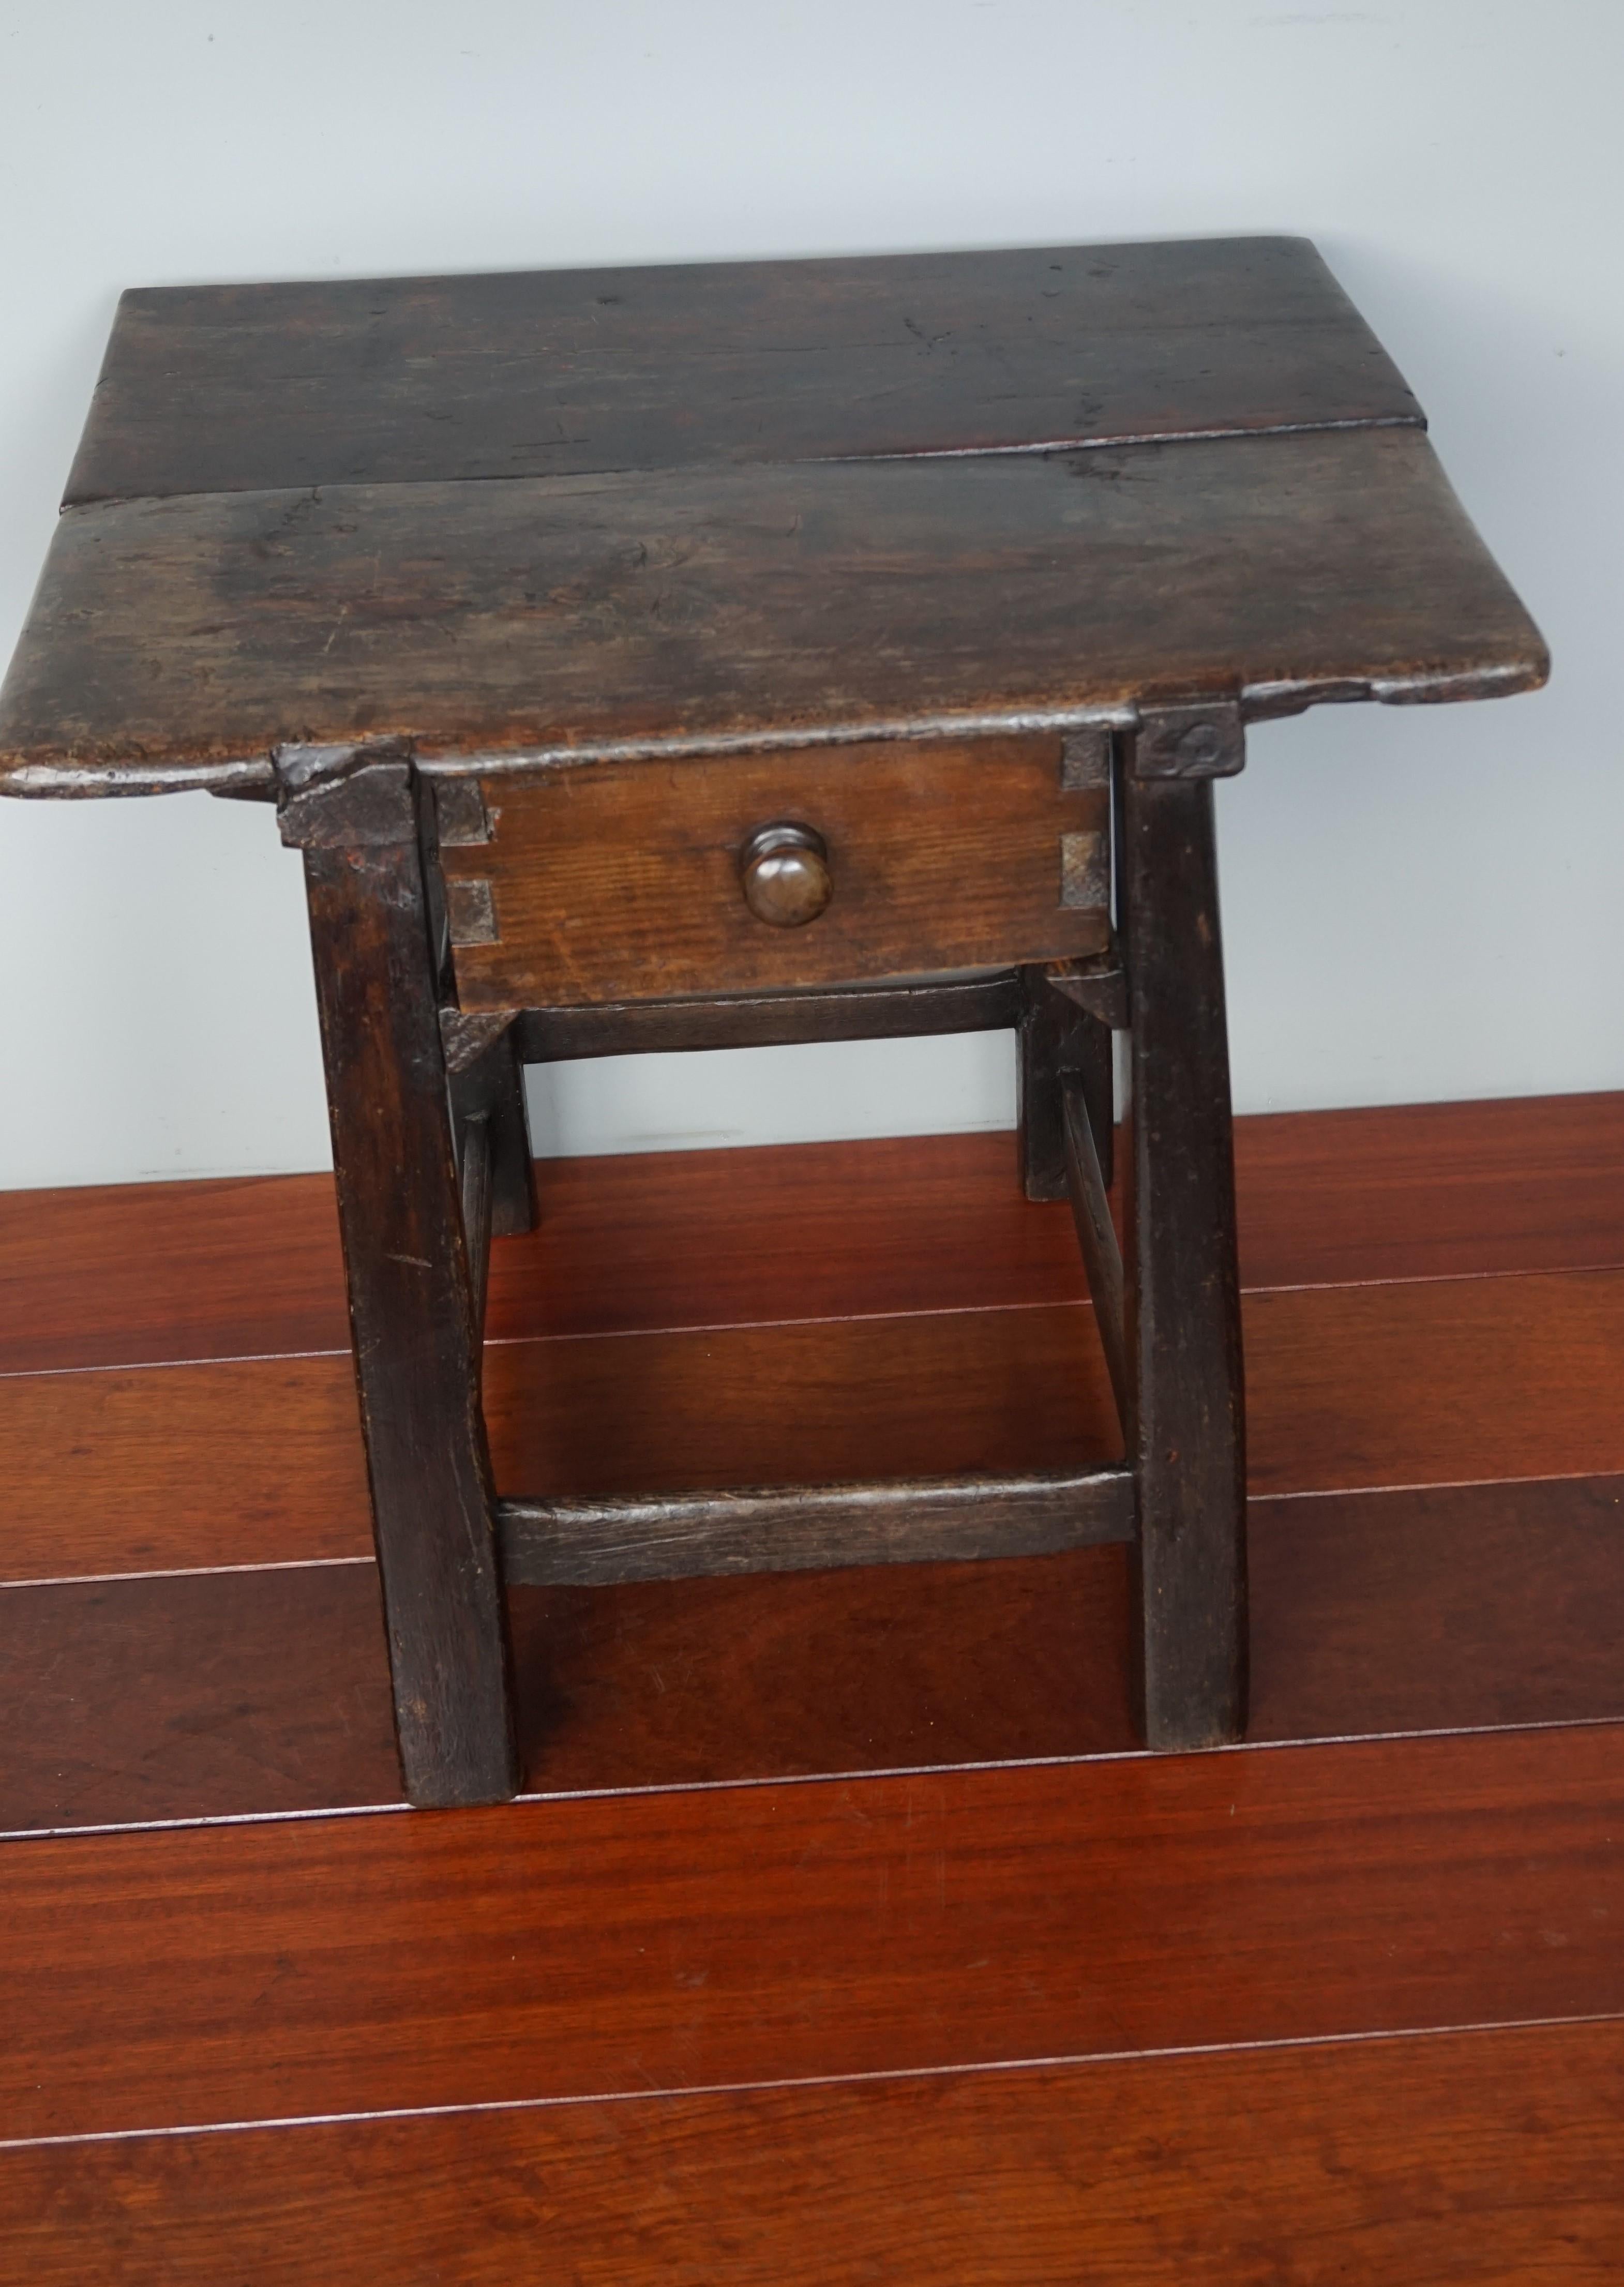 Antique and Rustic Early 1700s Wooden Spanish Countryside Pay Table with Drawer 1